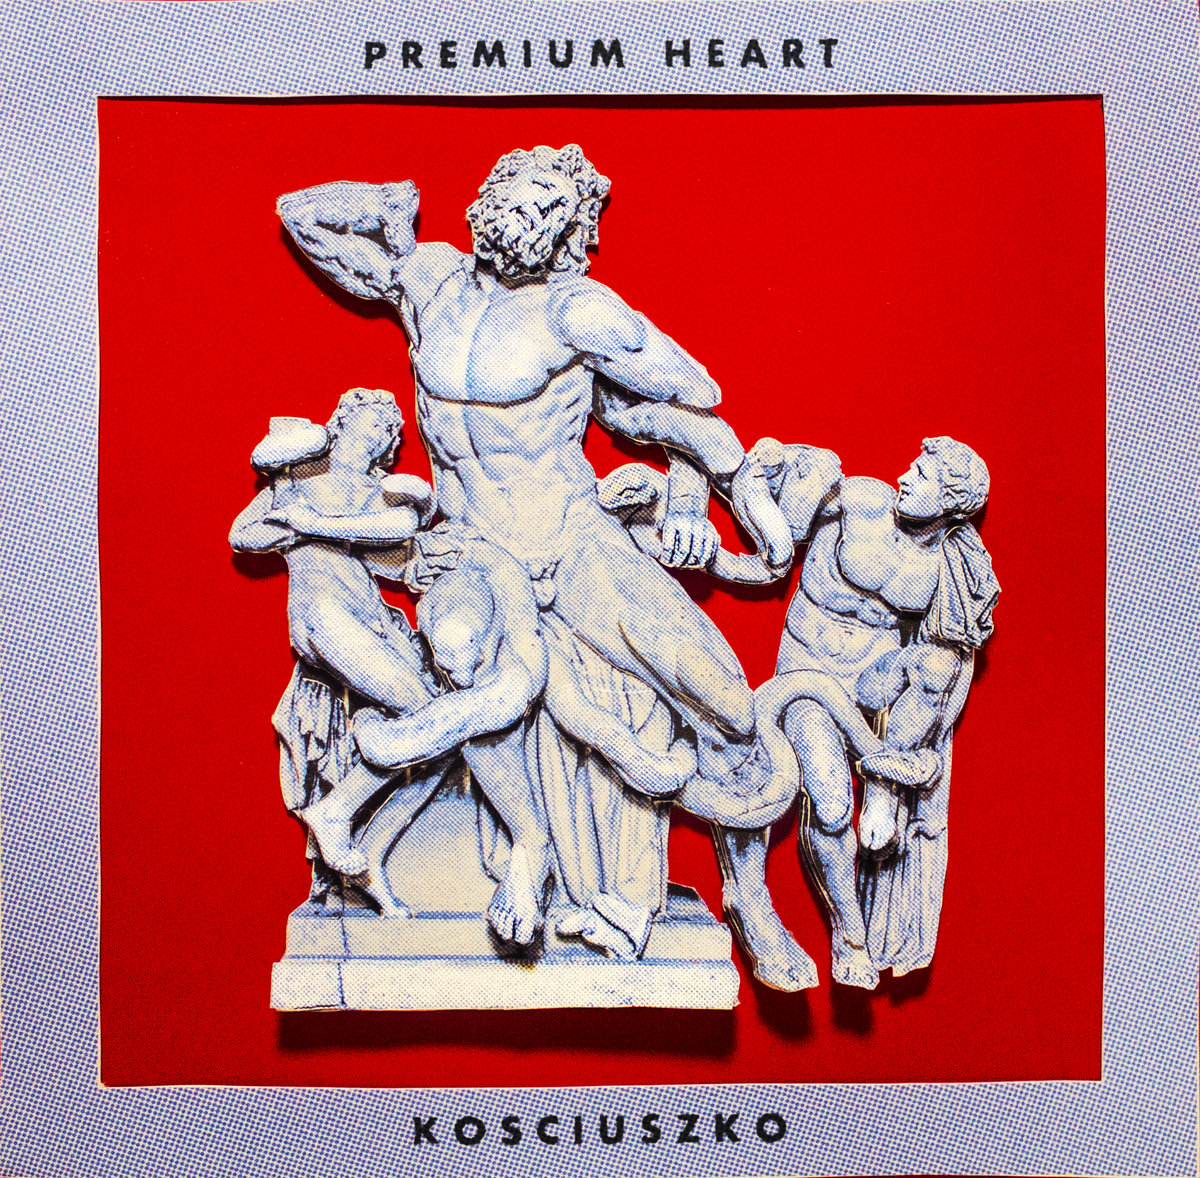 Cover art for Premium Heart's album, "Kosciuszko"; features super imposed image of the sculpture, "The Laocoon Group" over a solid bright red background